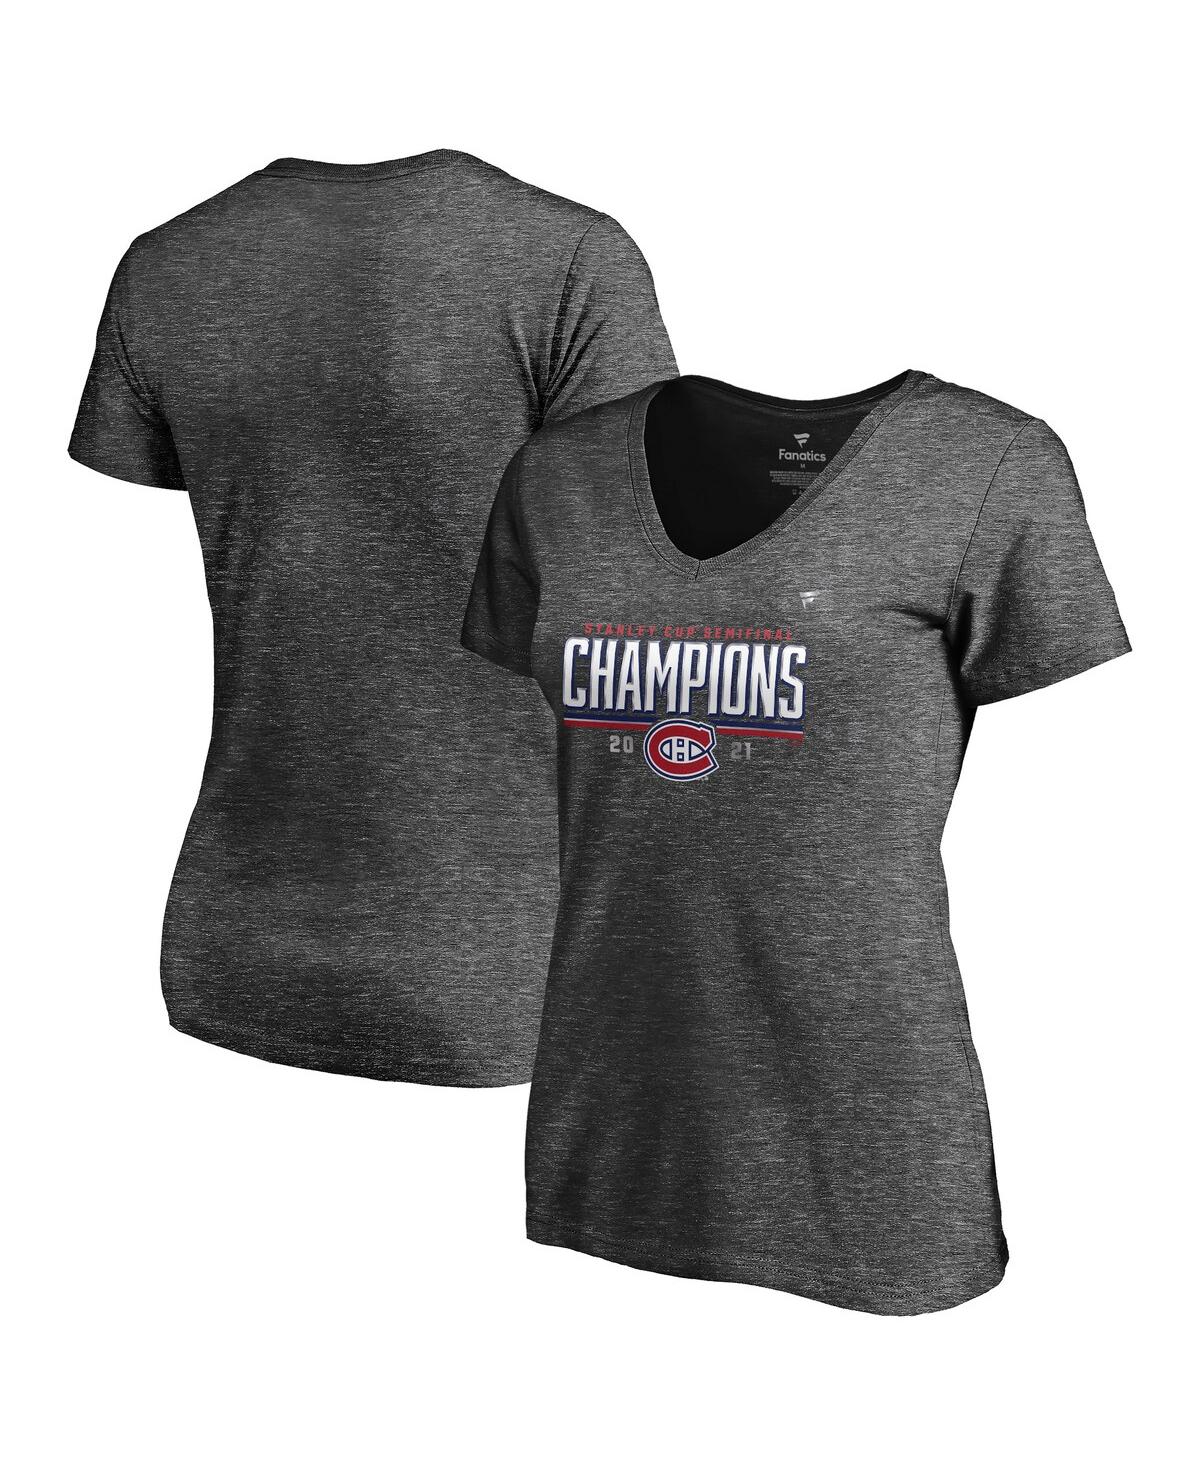 Women's Fanatics Heathered Charcoal Montreal Canadiens 2021 Stanley Cup Semifinal Champions Plus Size Locker Room V-Neck T-shirt - Heathered Charcoal